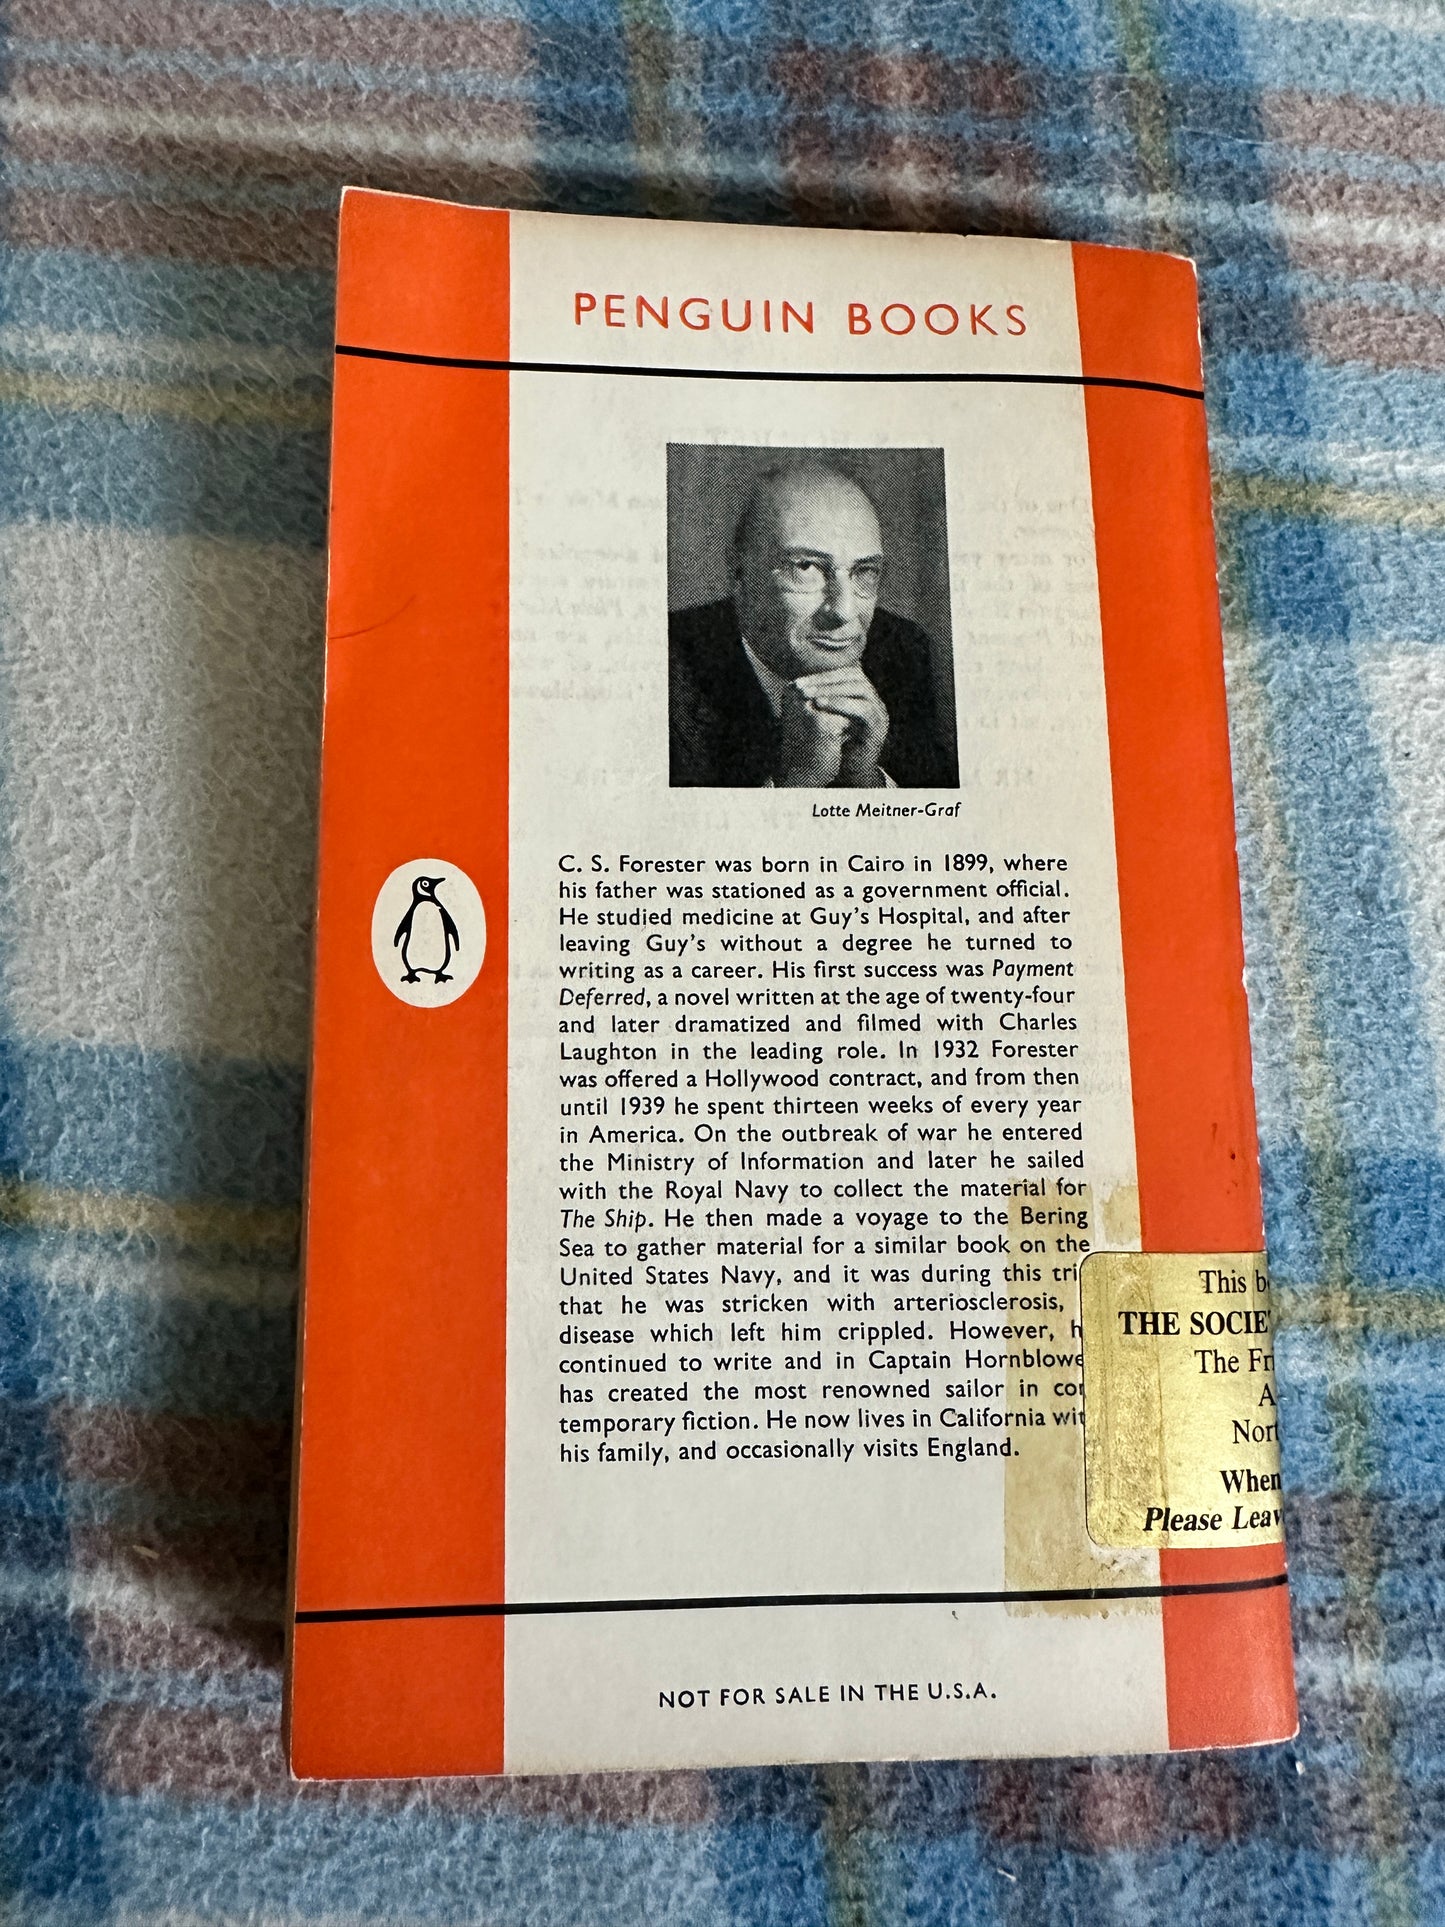 1956 The African Queen - C. S. Forester(Penguin Books)